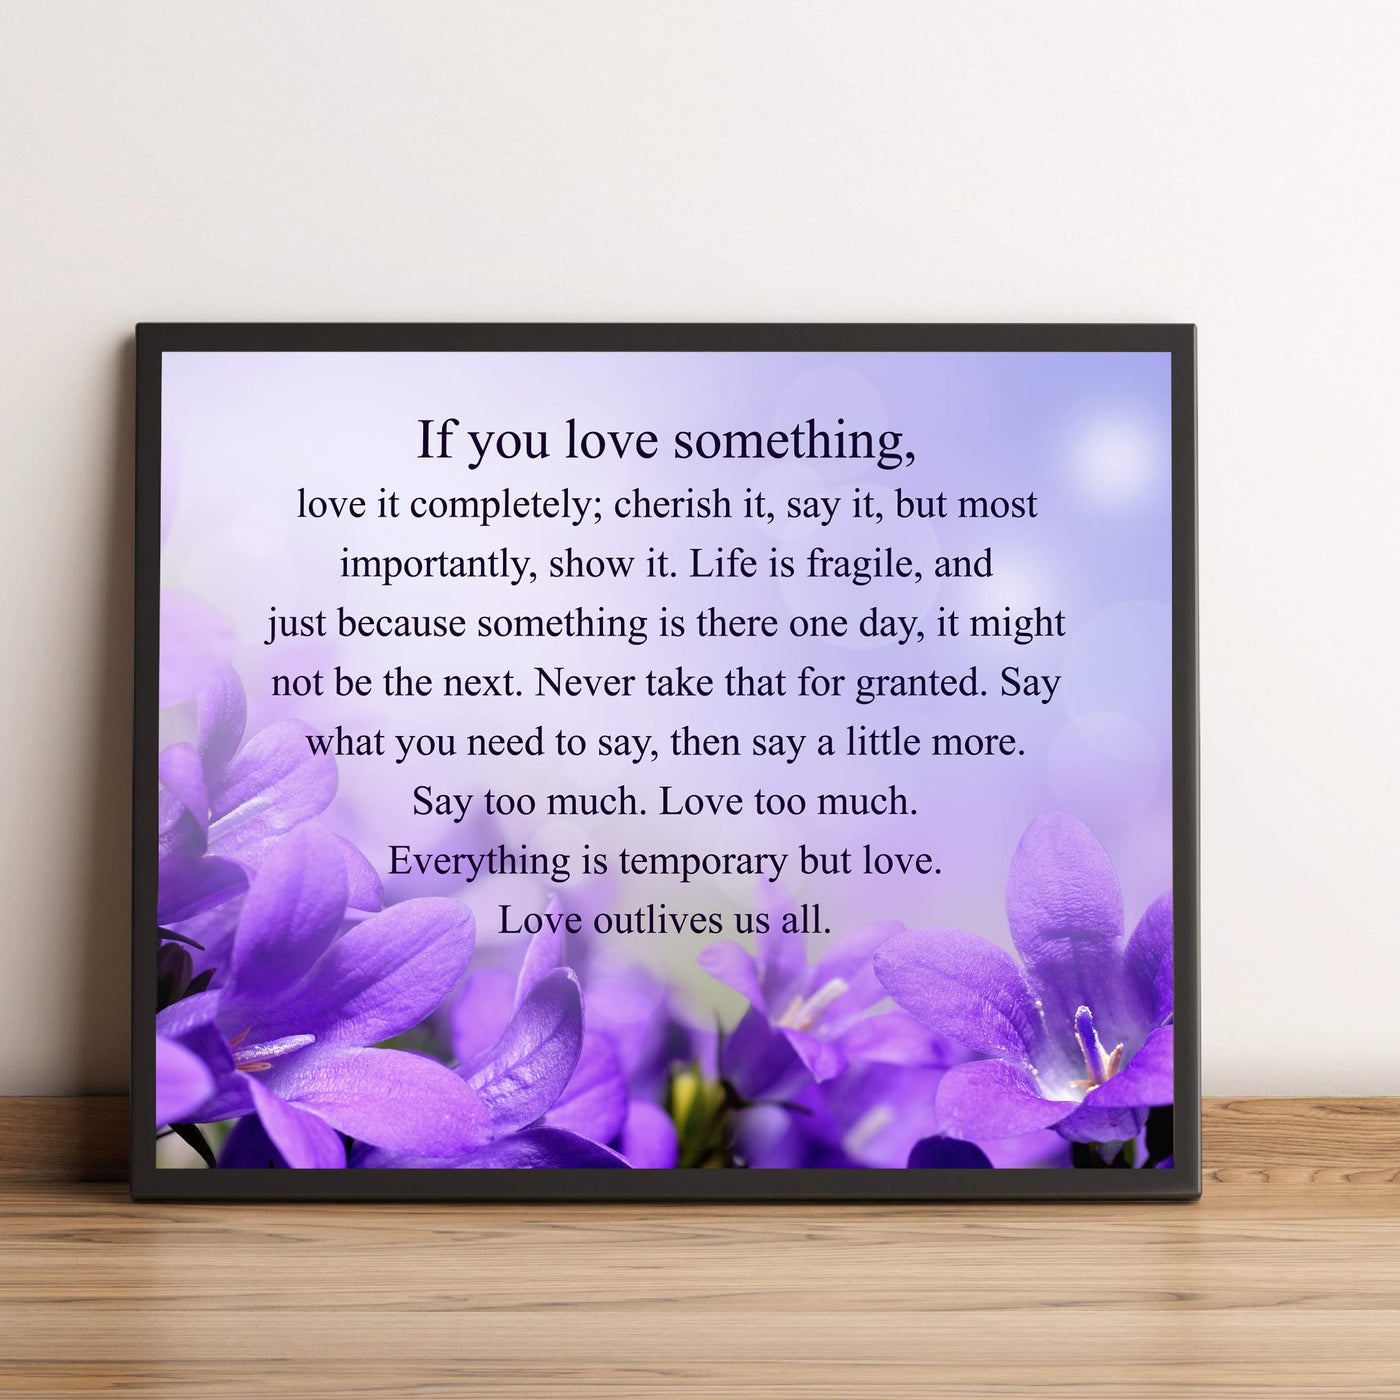 If You Love Something-Inspirational Wall Art -10 x 8" Love & Marriage Poster Print -Ready to Frame. Floral Typographic Design. Perfect for Home-Office-Studio Decor. Great Gift of Inspiration!